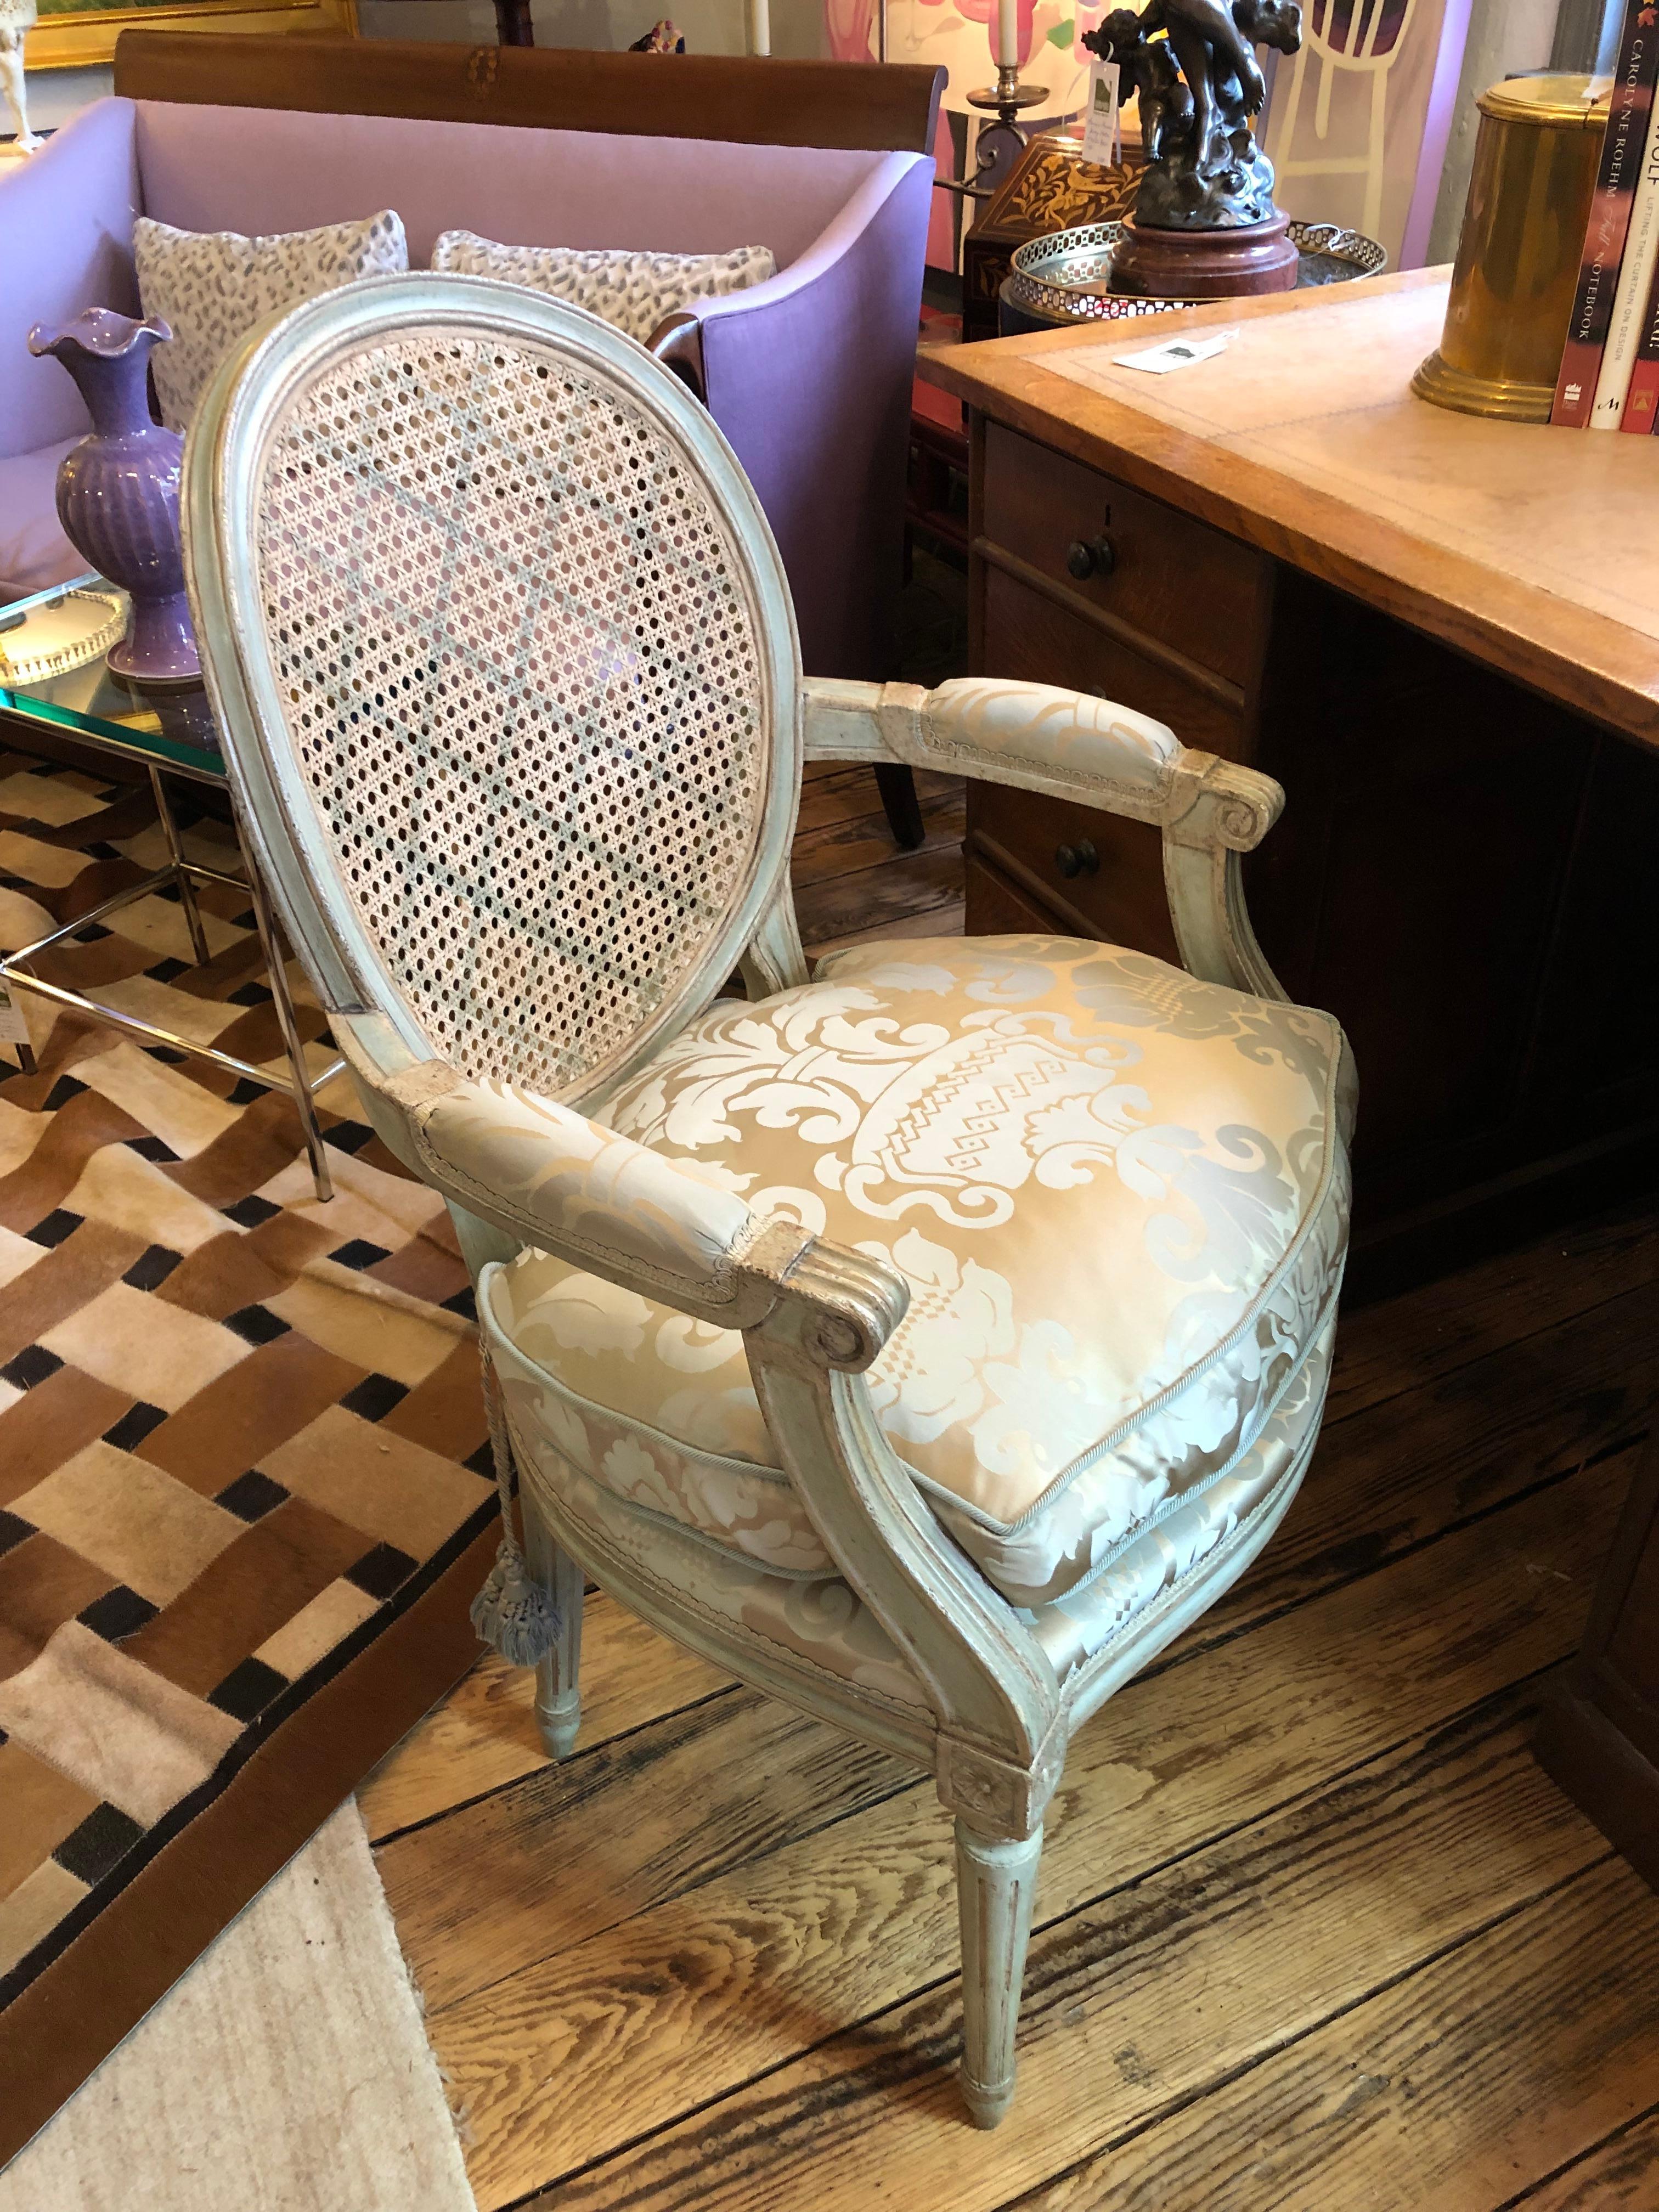 Glamorous celadon painted arm chair having silver gilt embellishment with classic French fauteuil shape and carving. The back is caned and painted with a subtle criss cross decoration, and the seat upholstery with down cushion are fit for a Princess